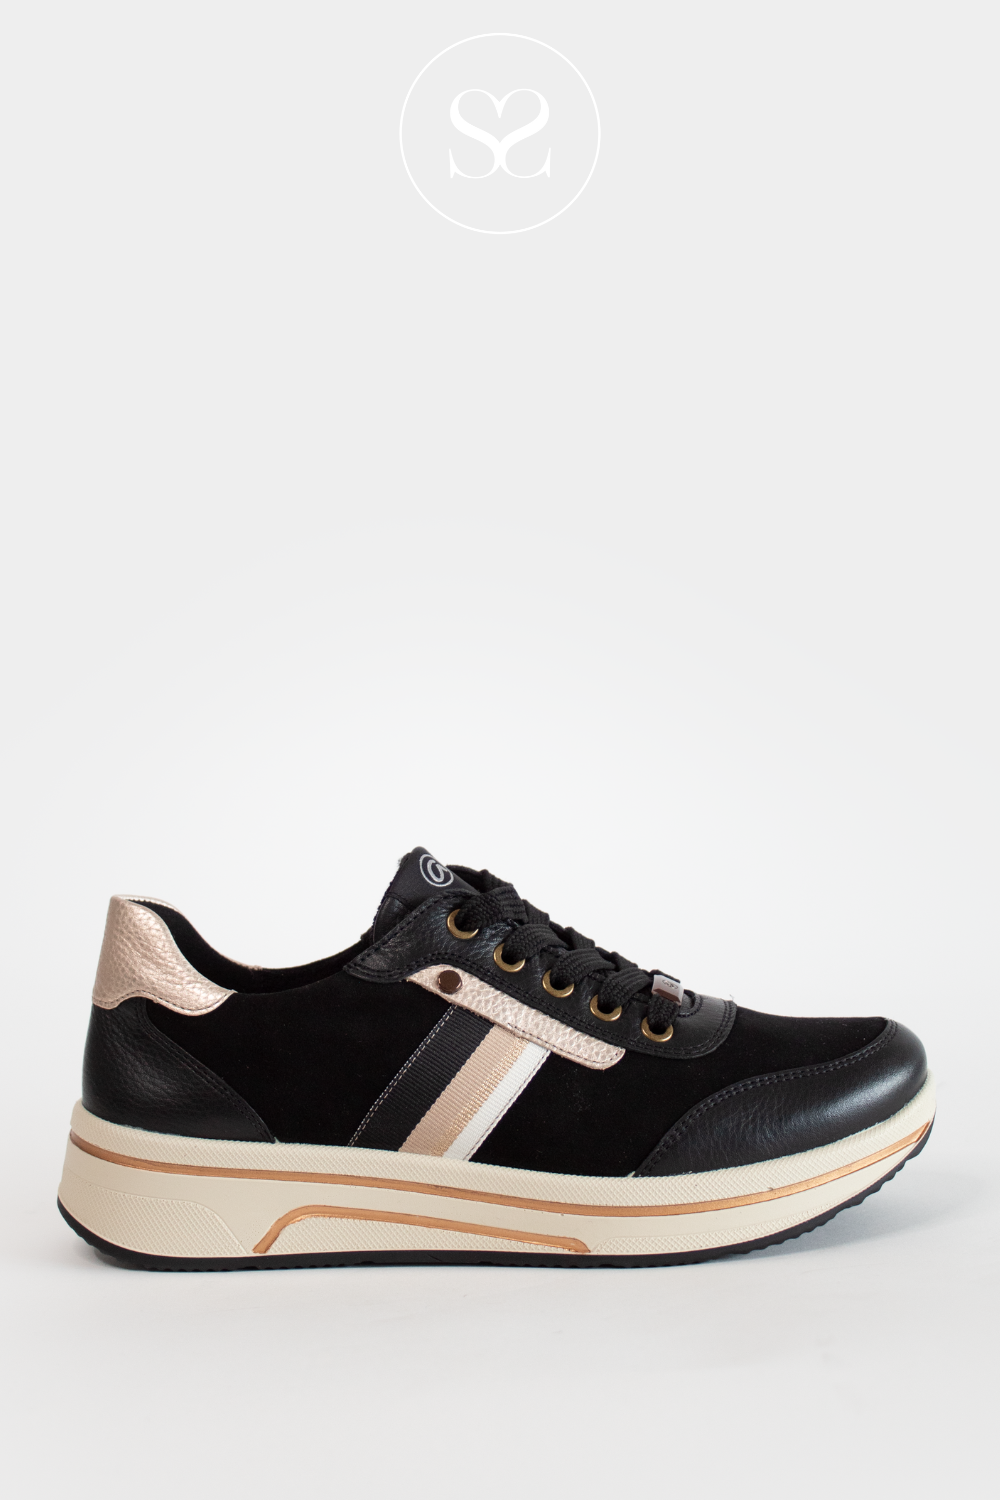 Comfortable wedge trainers from Ara in Black and bronze